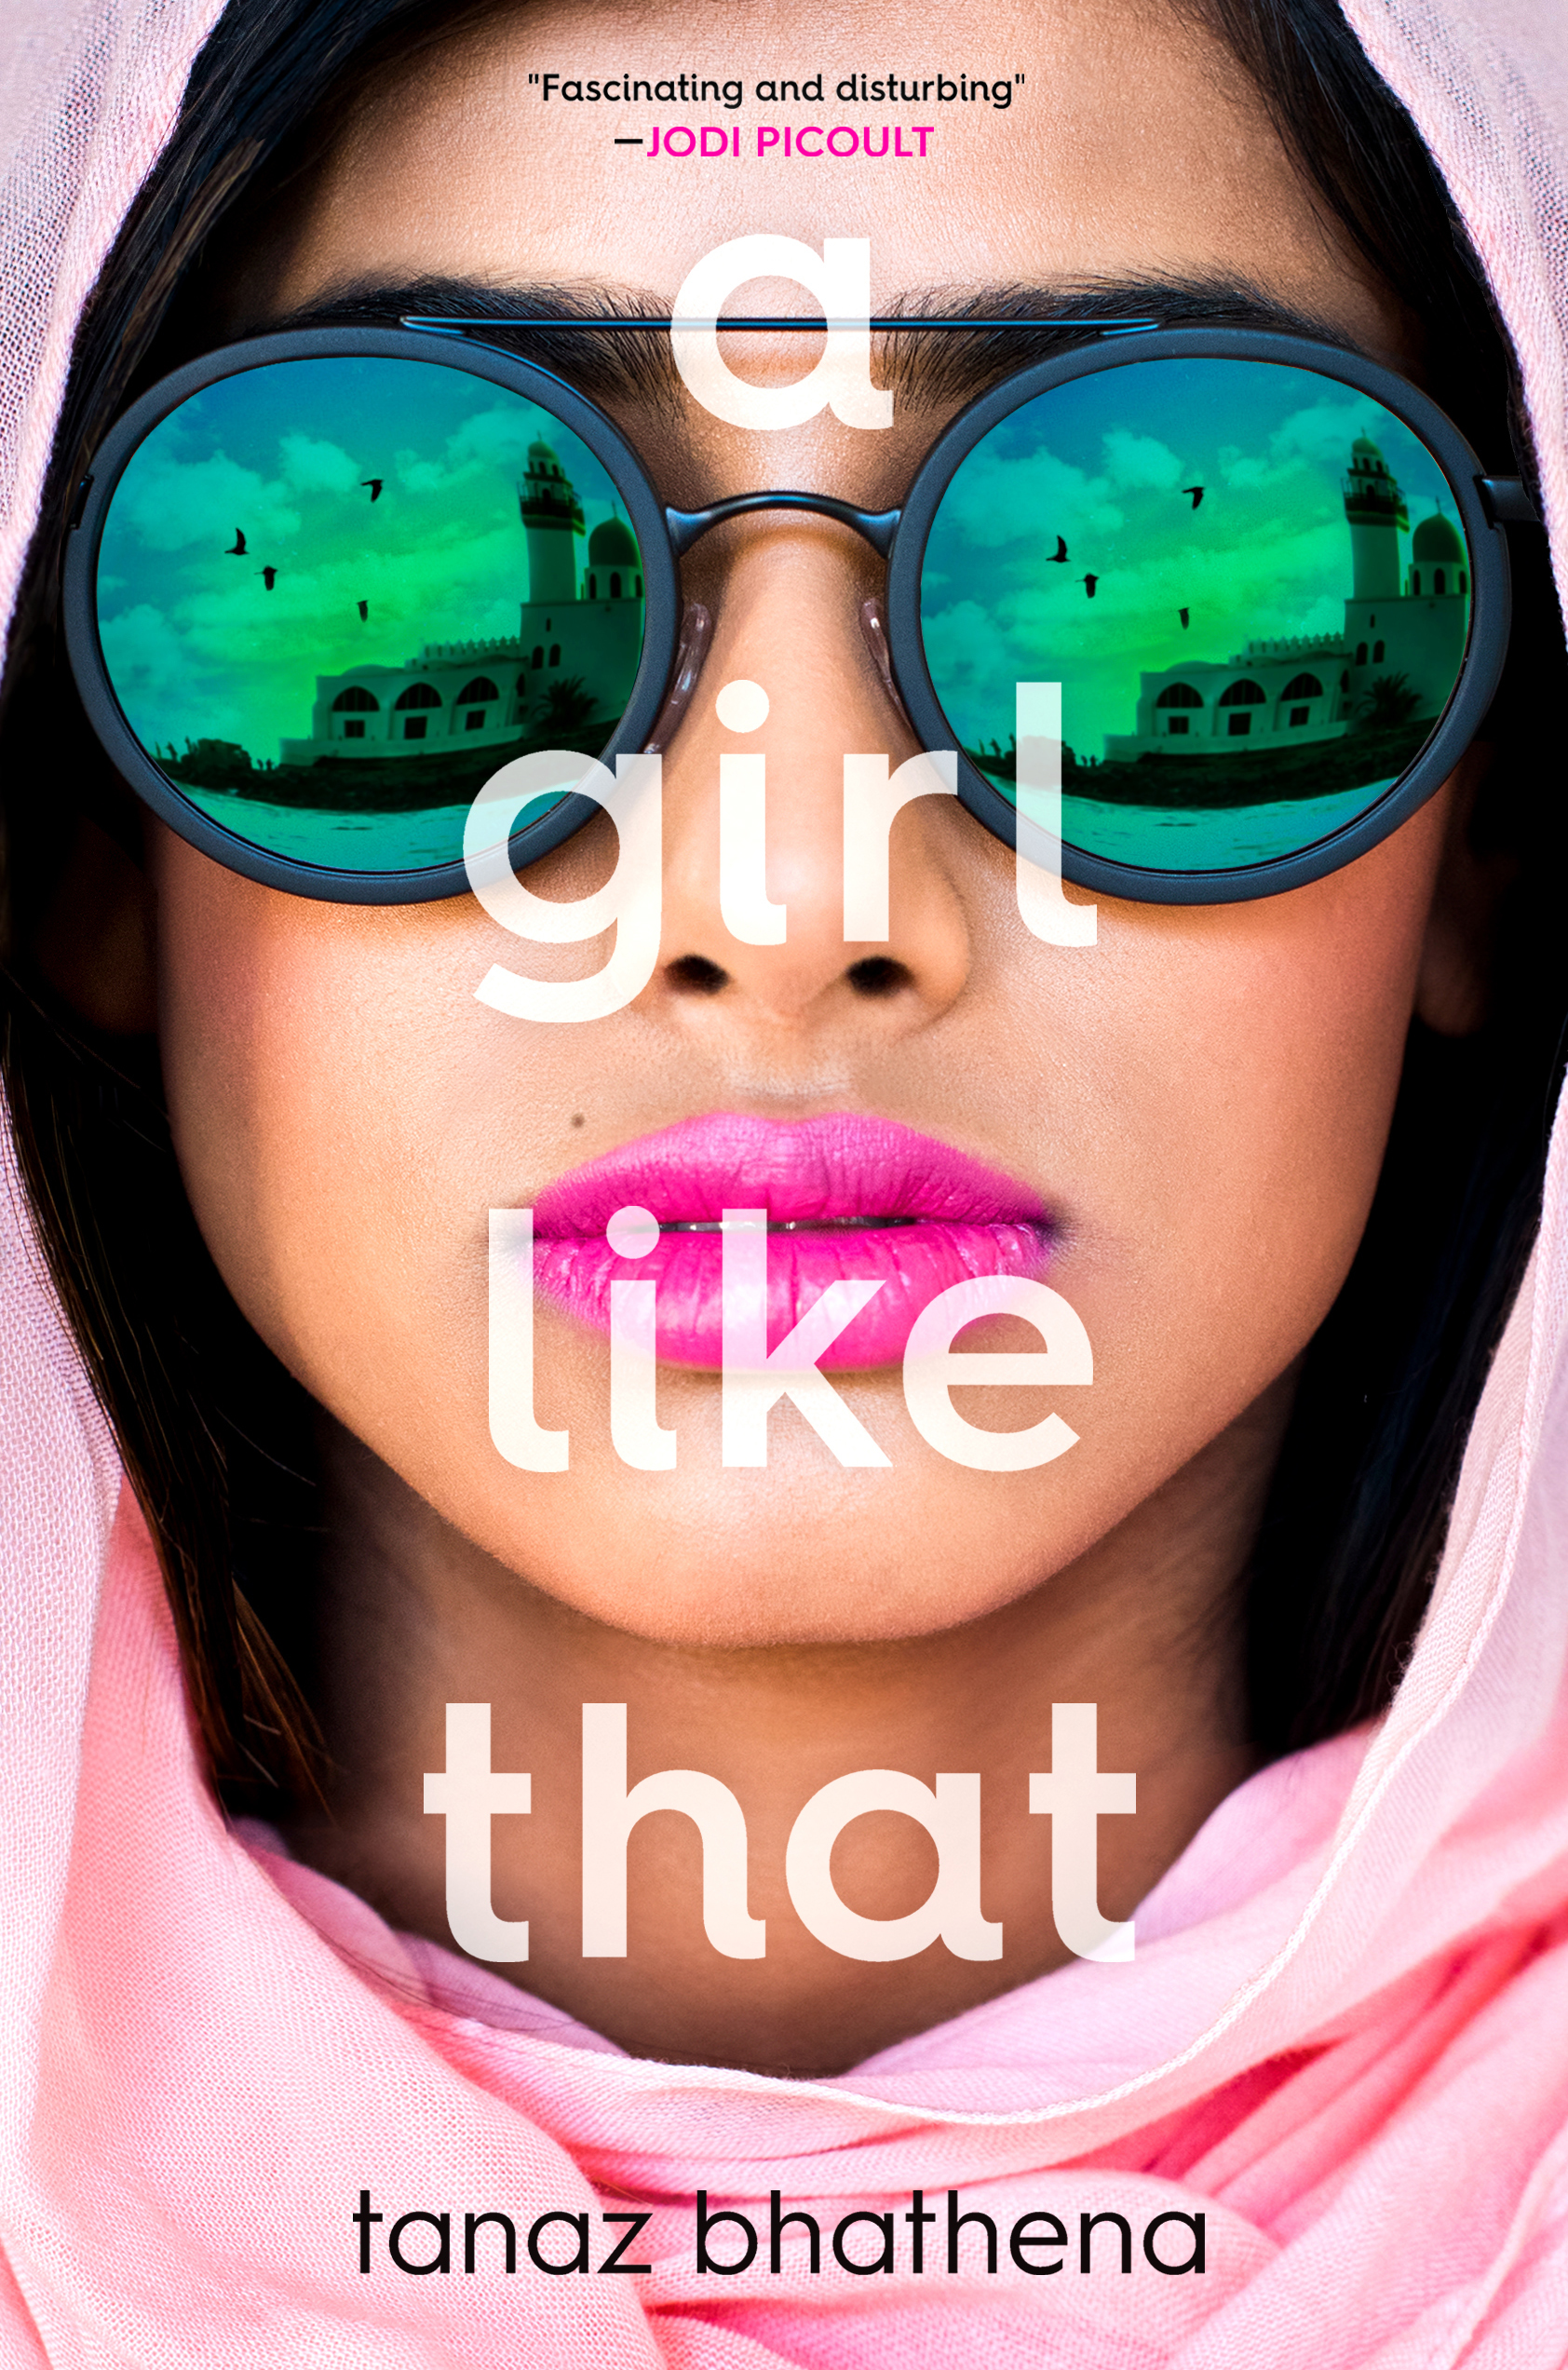 Image for "A Girl Like That"